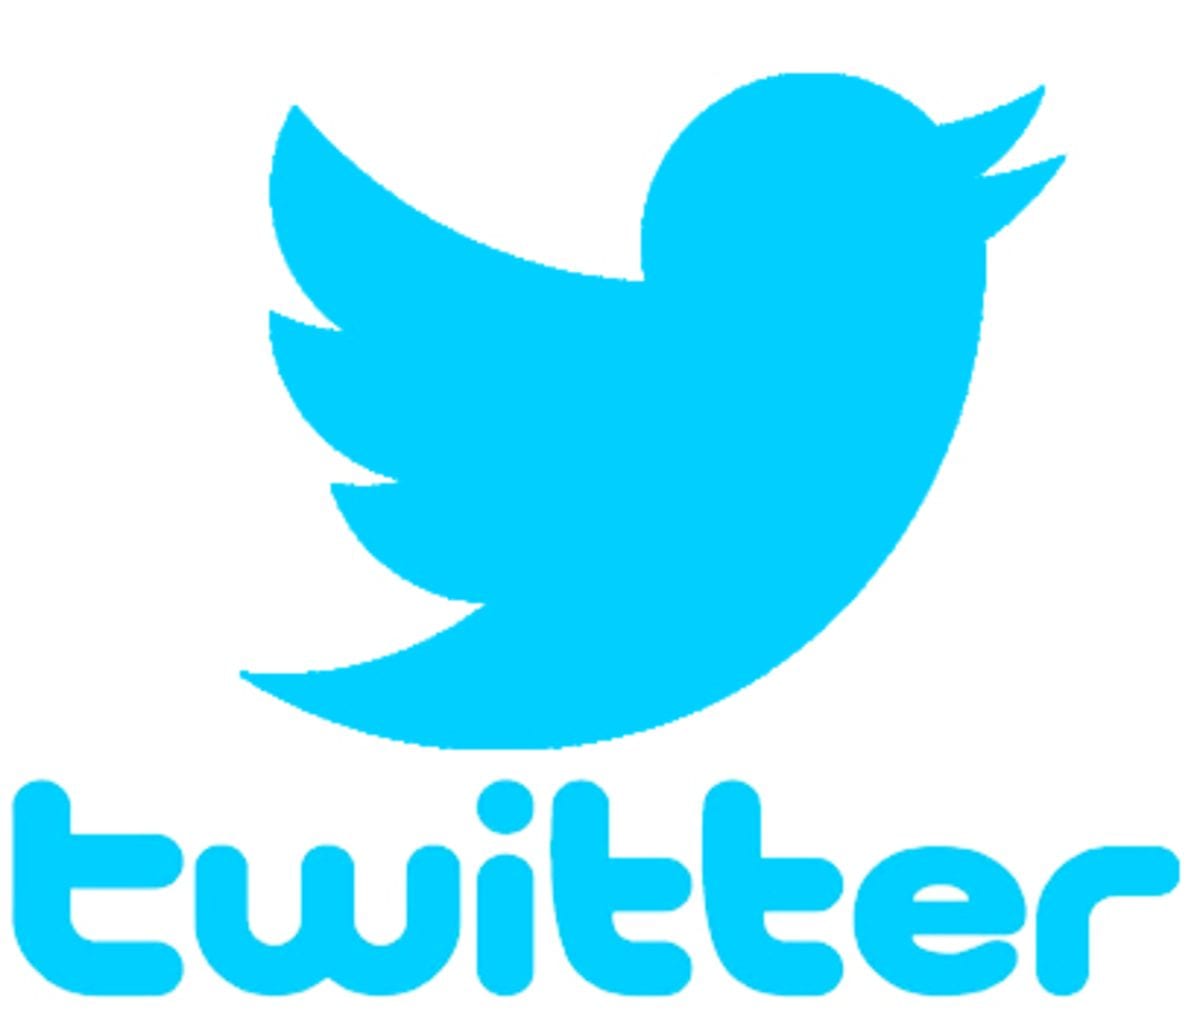 twitter is one of the most important Social Media Marketing tools